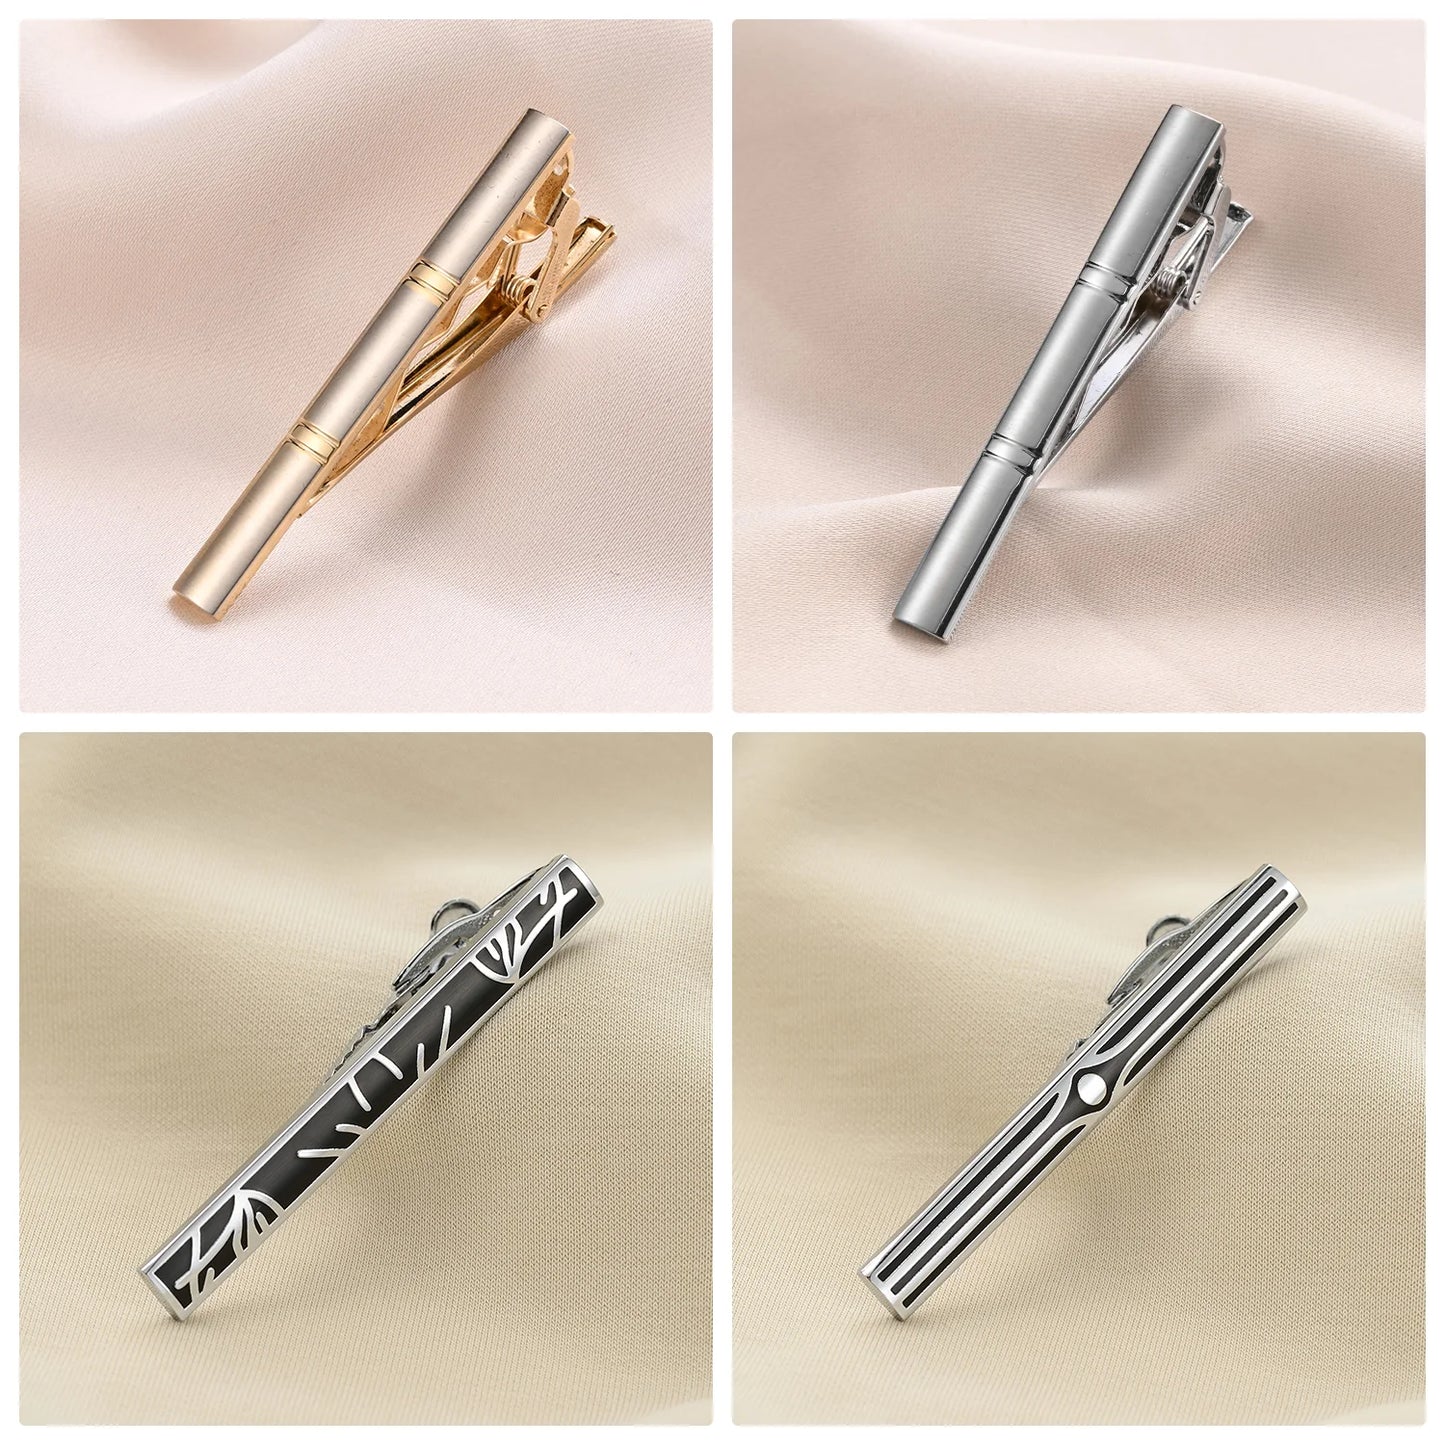 8 PCS Tie Clips Set With Gift Box Wedding Guests Gifts Luxury Men's Jewelry Business Metal Man Shirt Cufflinks Gift For Husband